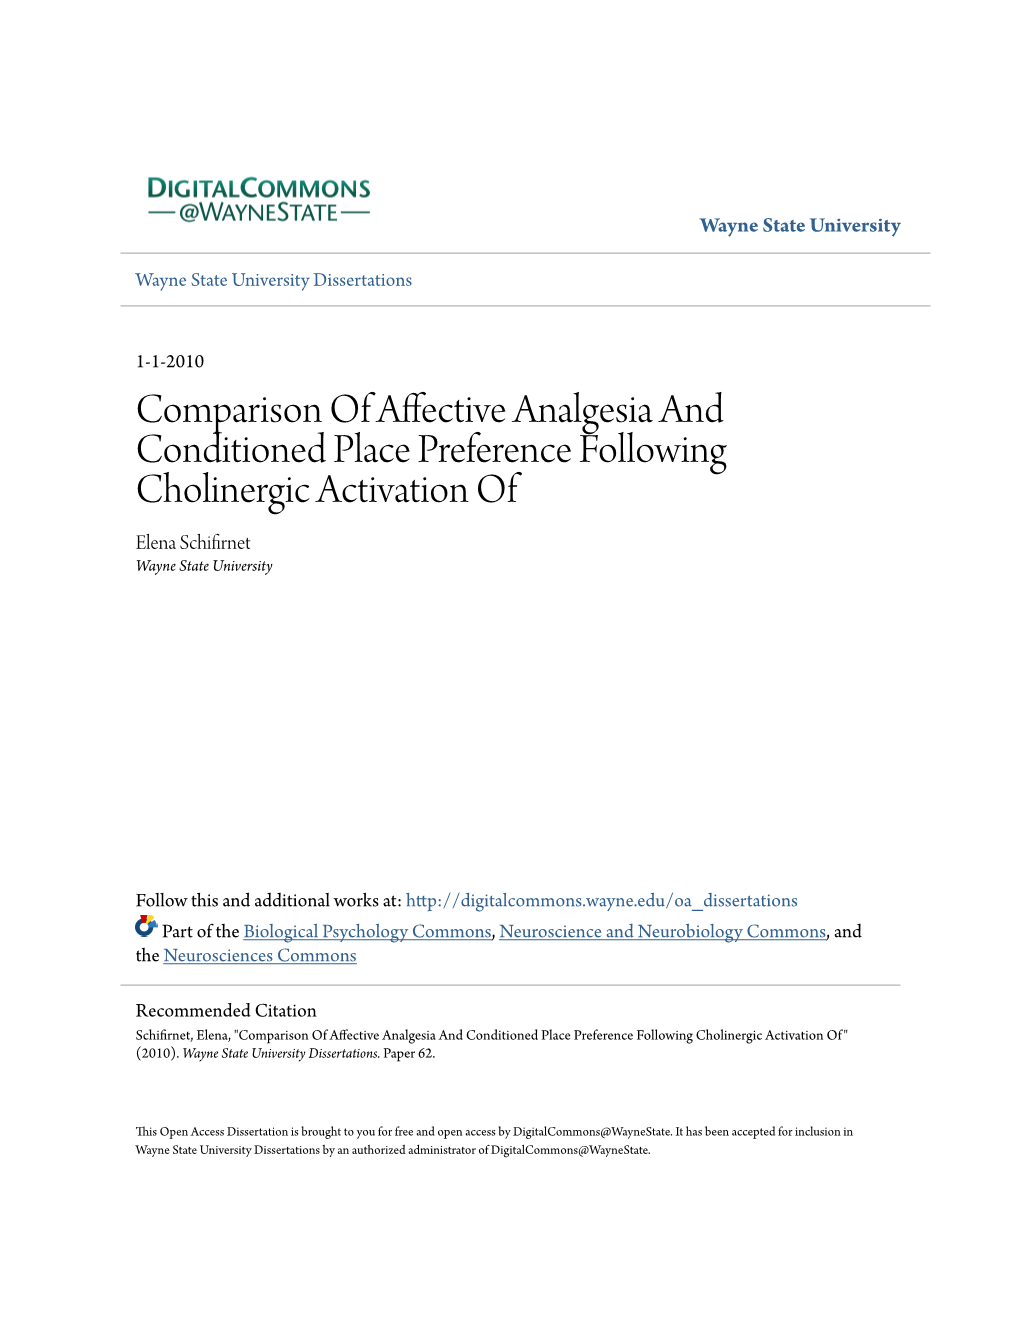 Comparison of Affective Analgesia and Conditioned Place Preference Following Cholinergic Activation of Elena Schifirnet Wayne State University